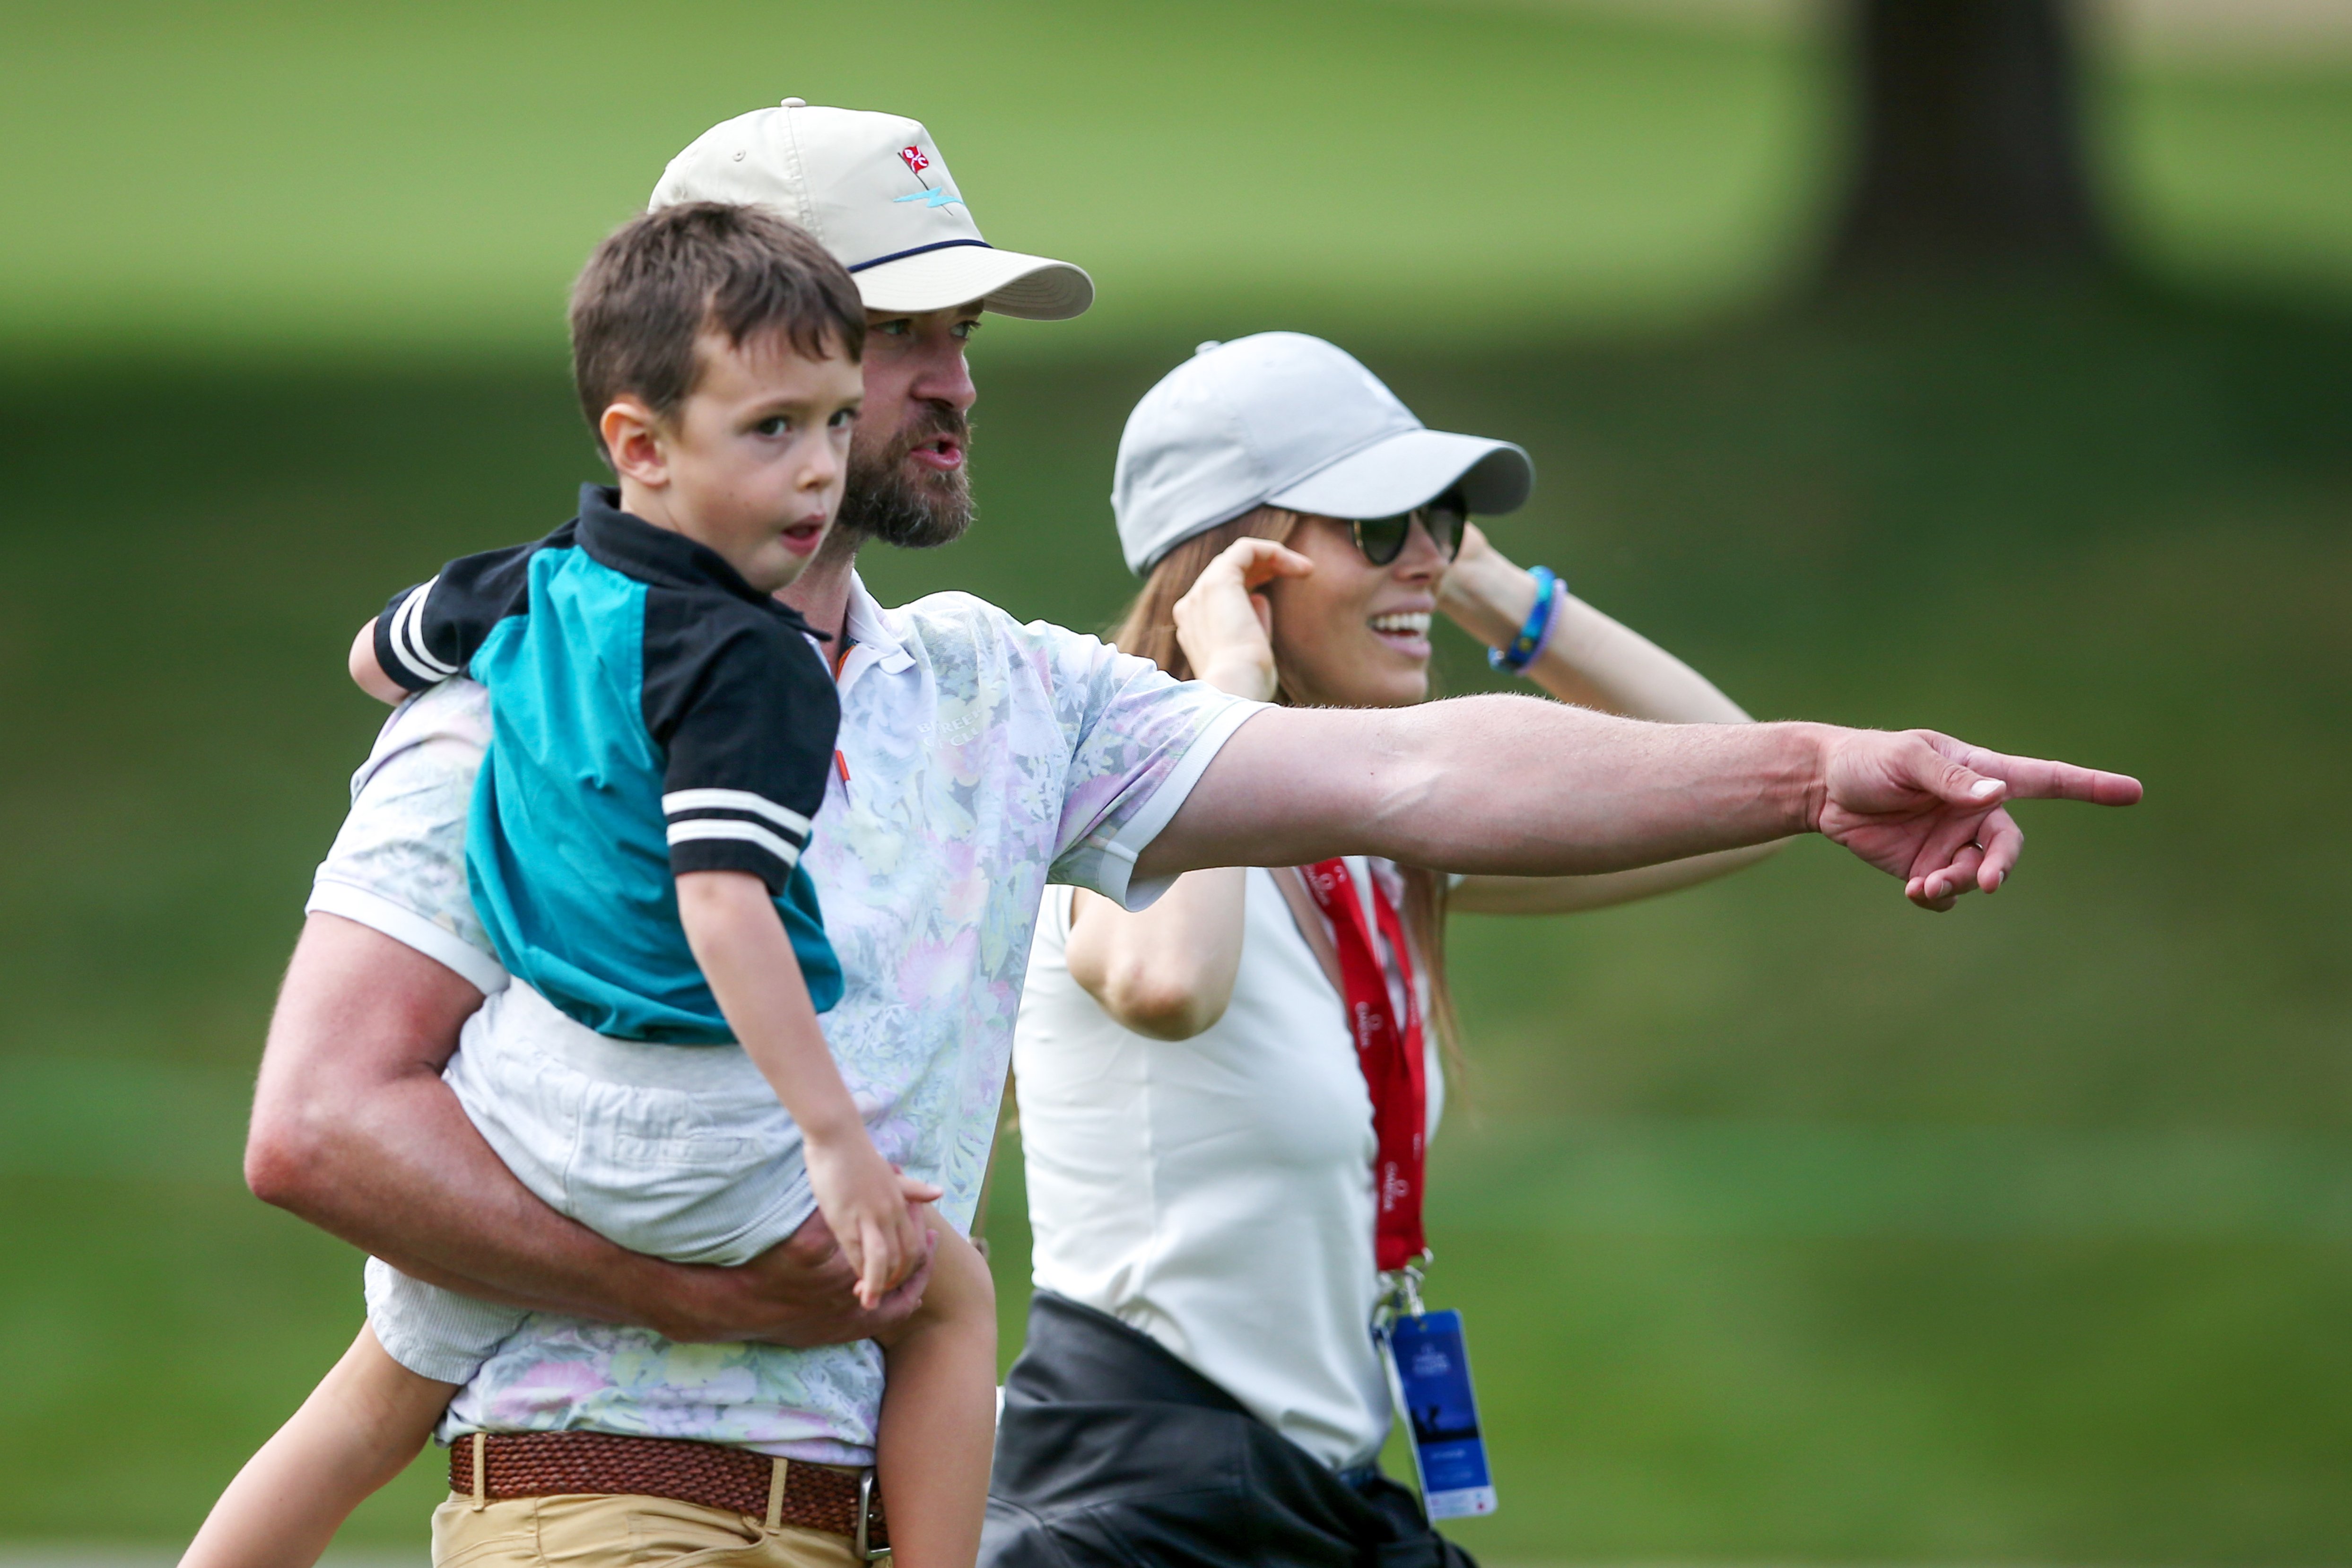 Justin Timberlake with his son Silasand his wife Jessica Biel at the Omega European Masters in 2019 in Crans-Montana, Switzerland. | Source: Getty Images